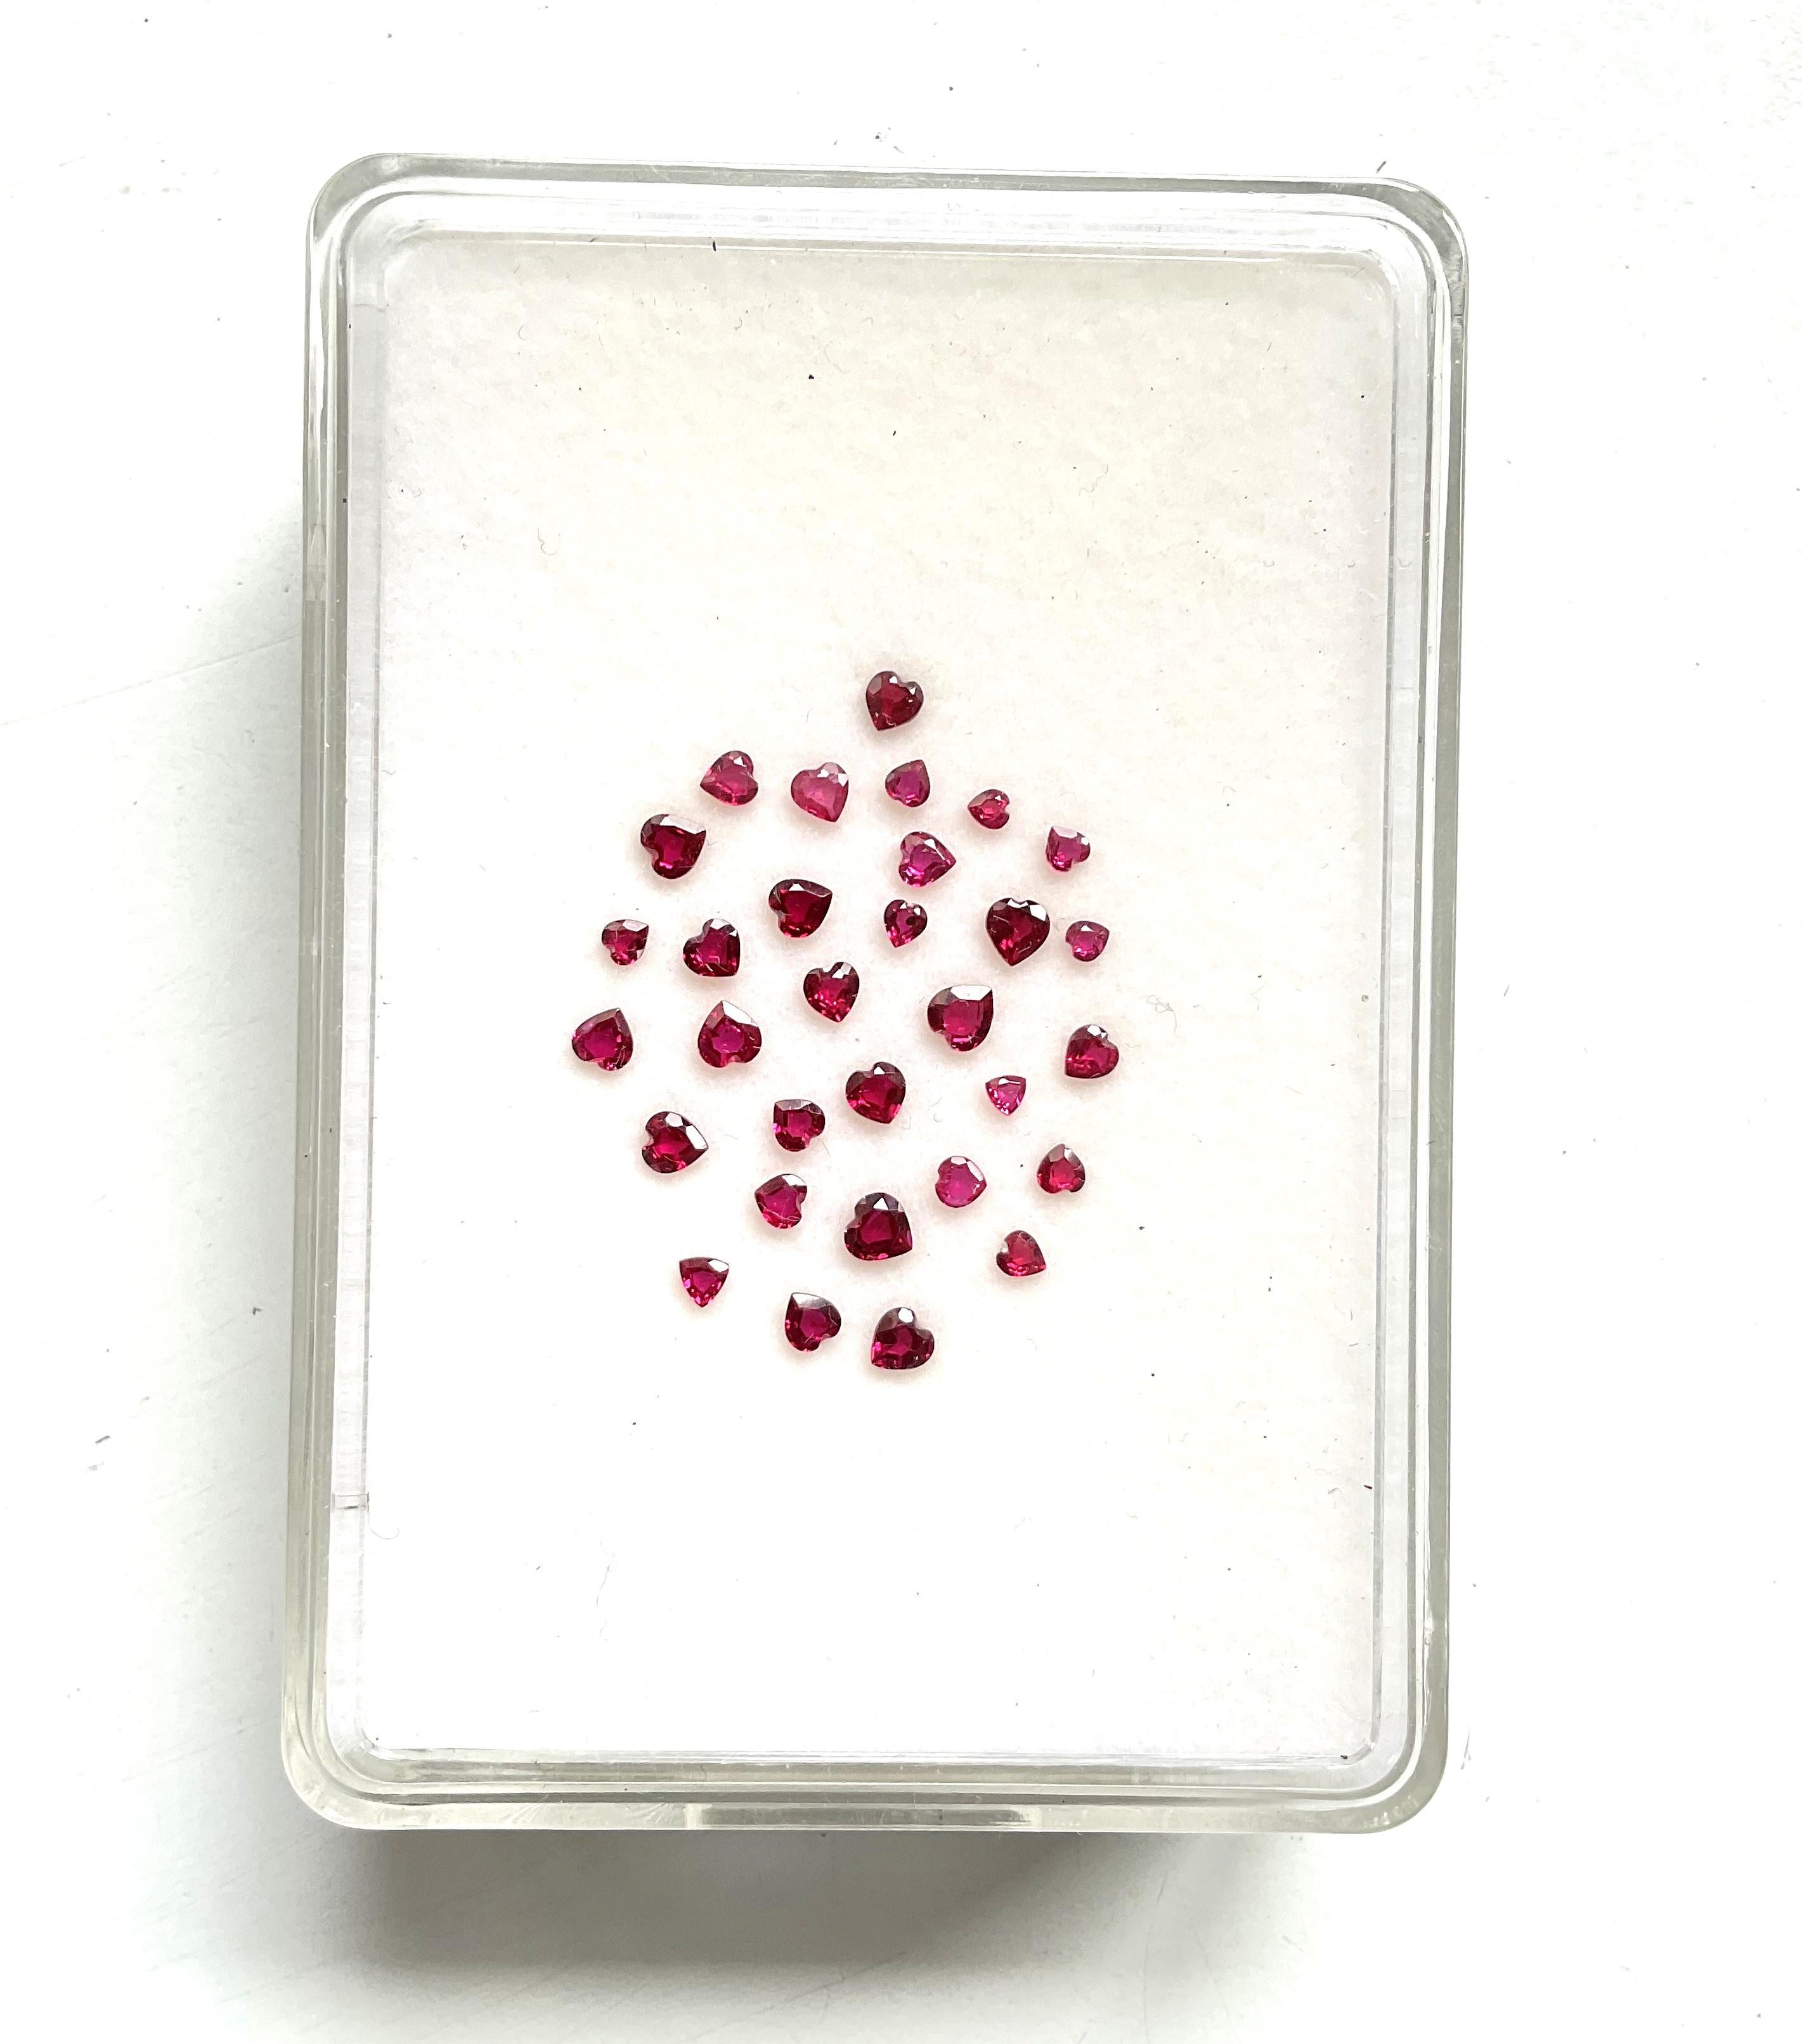 3.59 Carats Mozambique Ruby Top Quality Heart Cut stone No Heat Natural Gemstone

Weight: 3.59 Carats
Size: 2 to 3.5 MM
Pieces: 31
Shape: Faceted heart cut stone